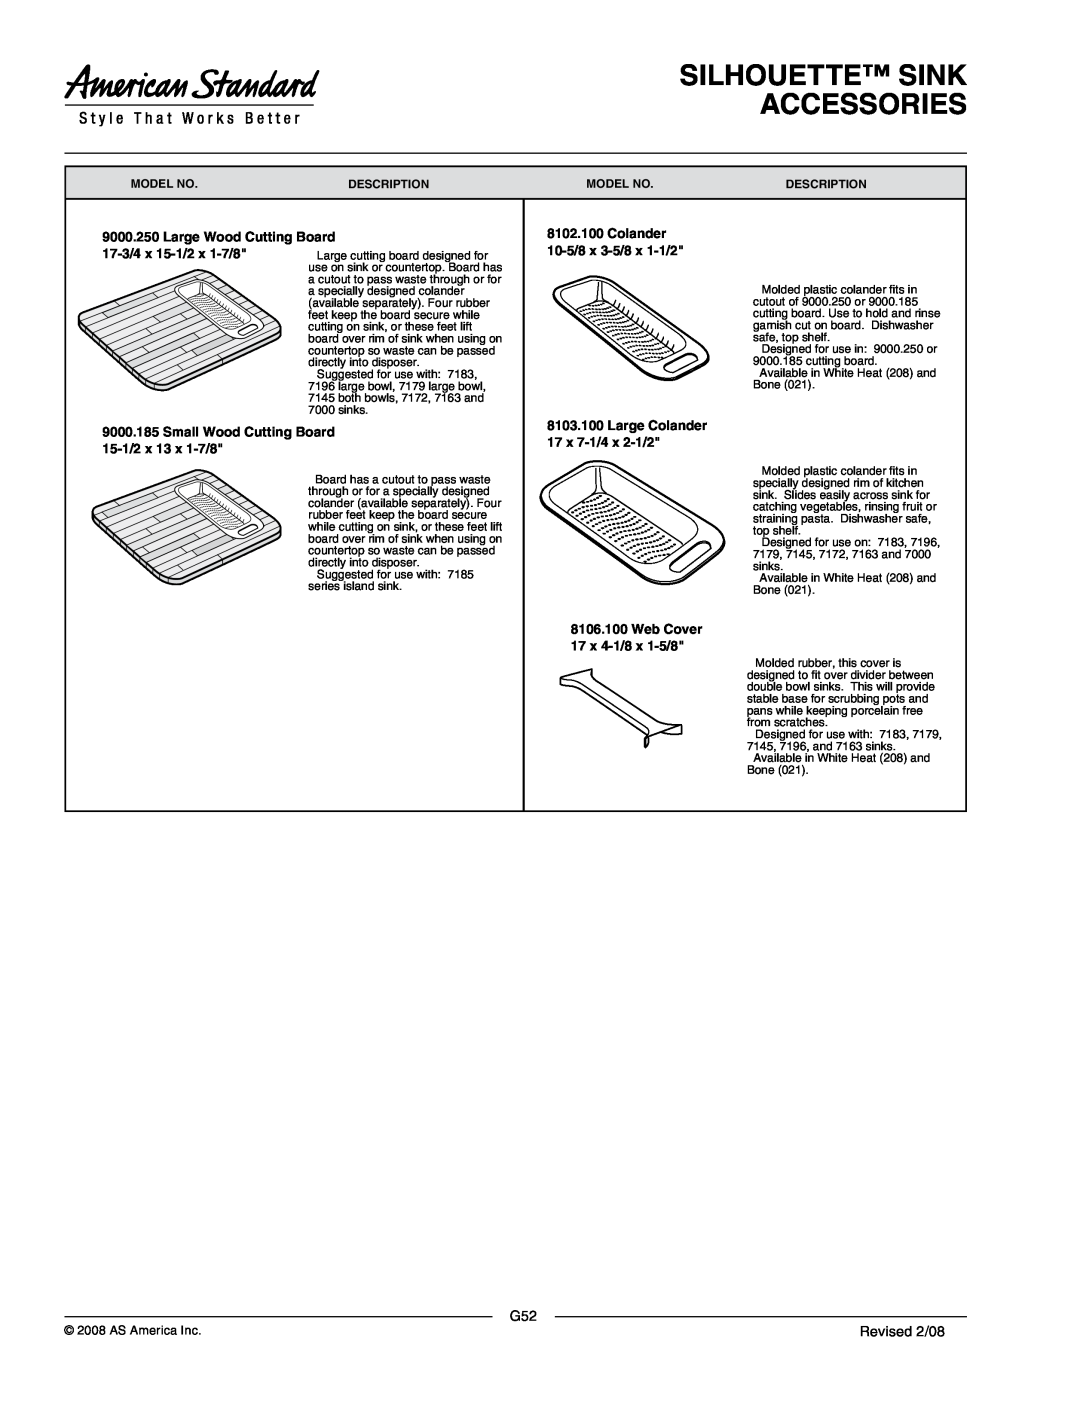 American Standard 7504.103 manual Silhouette Sink Accessories, Small Wood Cutting Board, 15-1/2x 13 x 1-7/8, Revised 2/08 